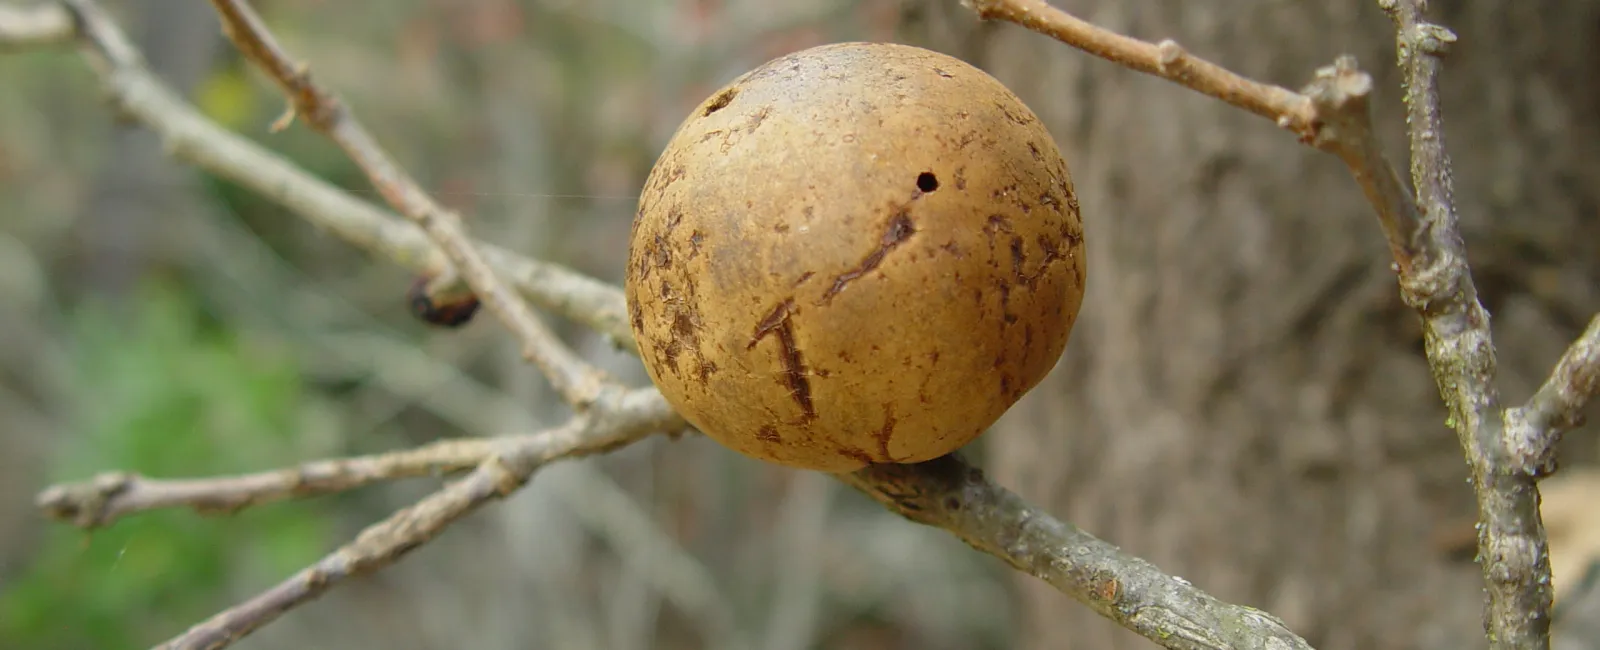 What Are Oak Galls?